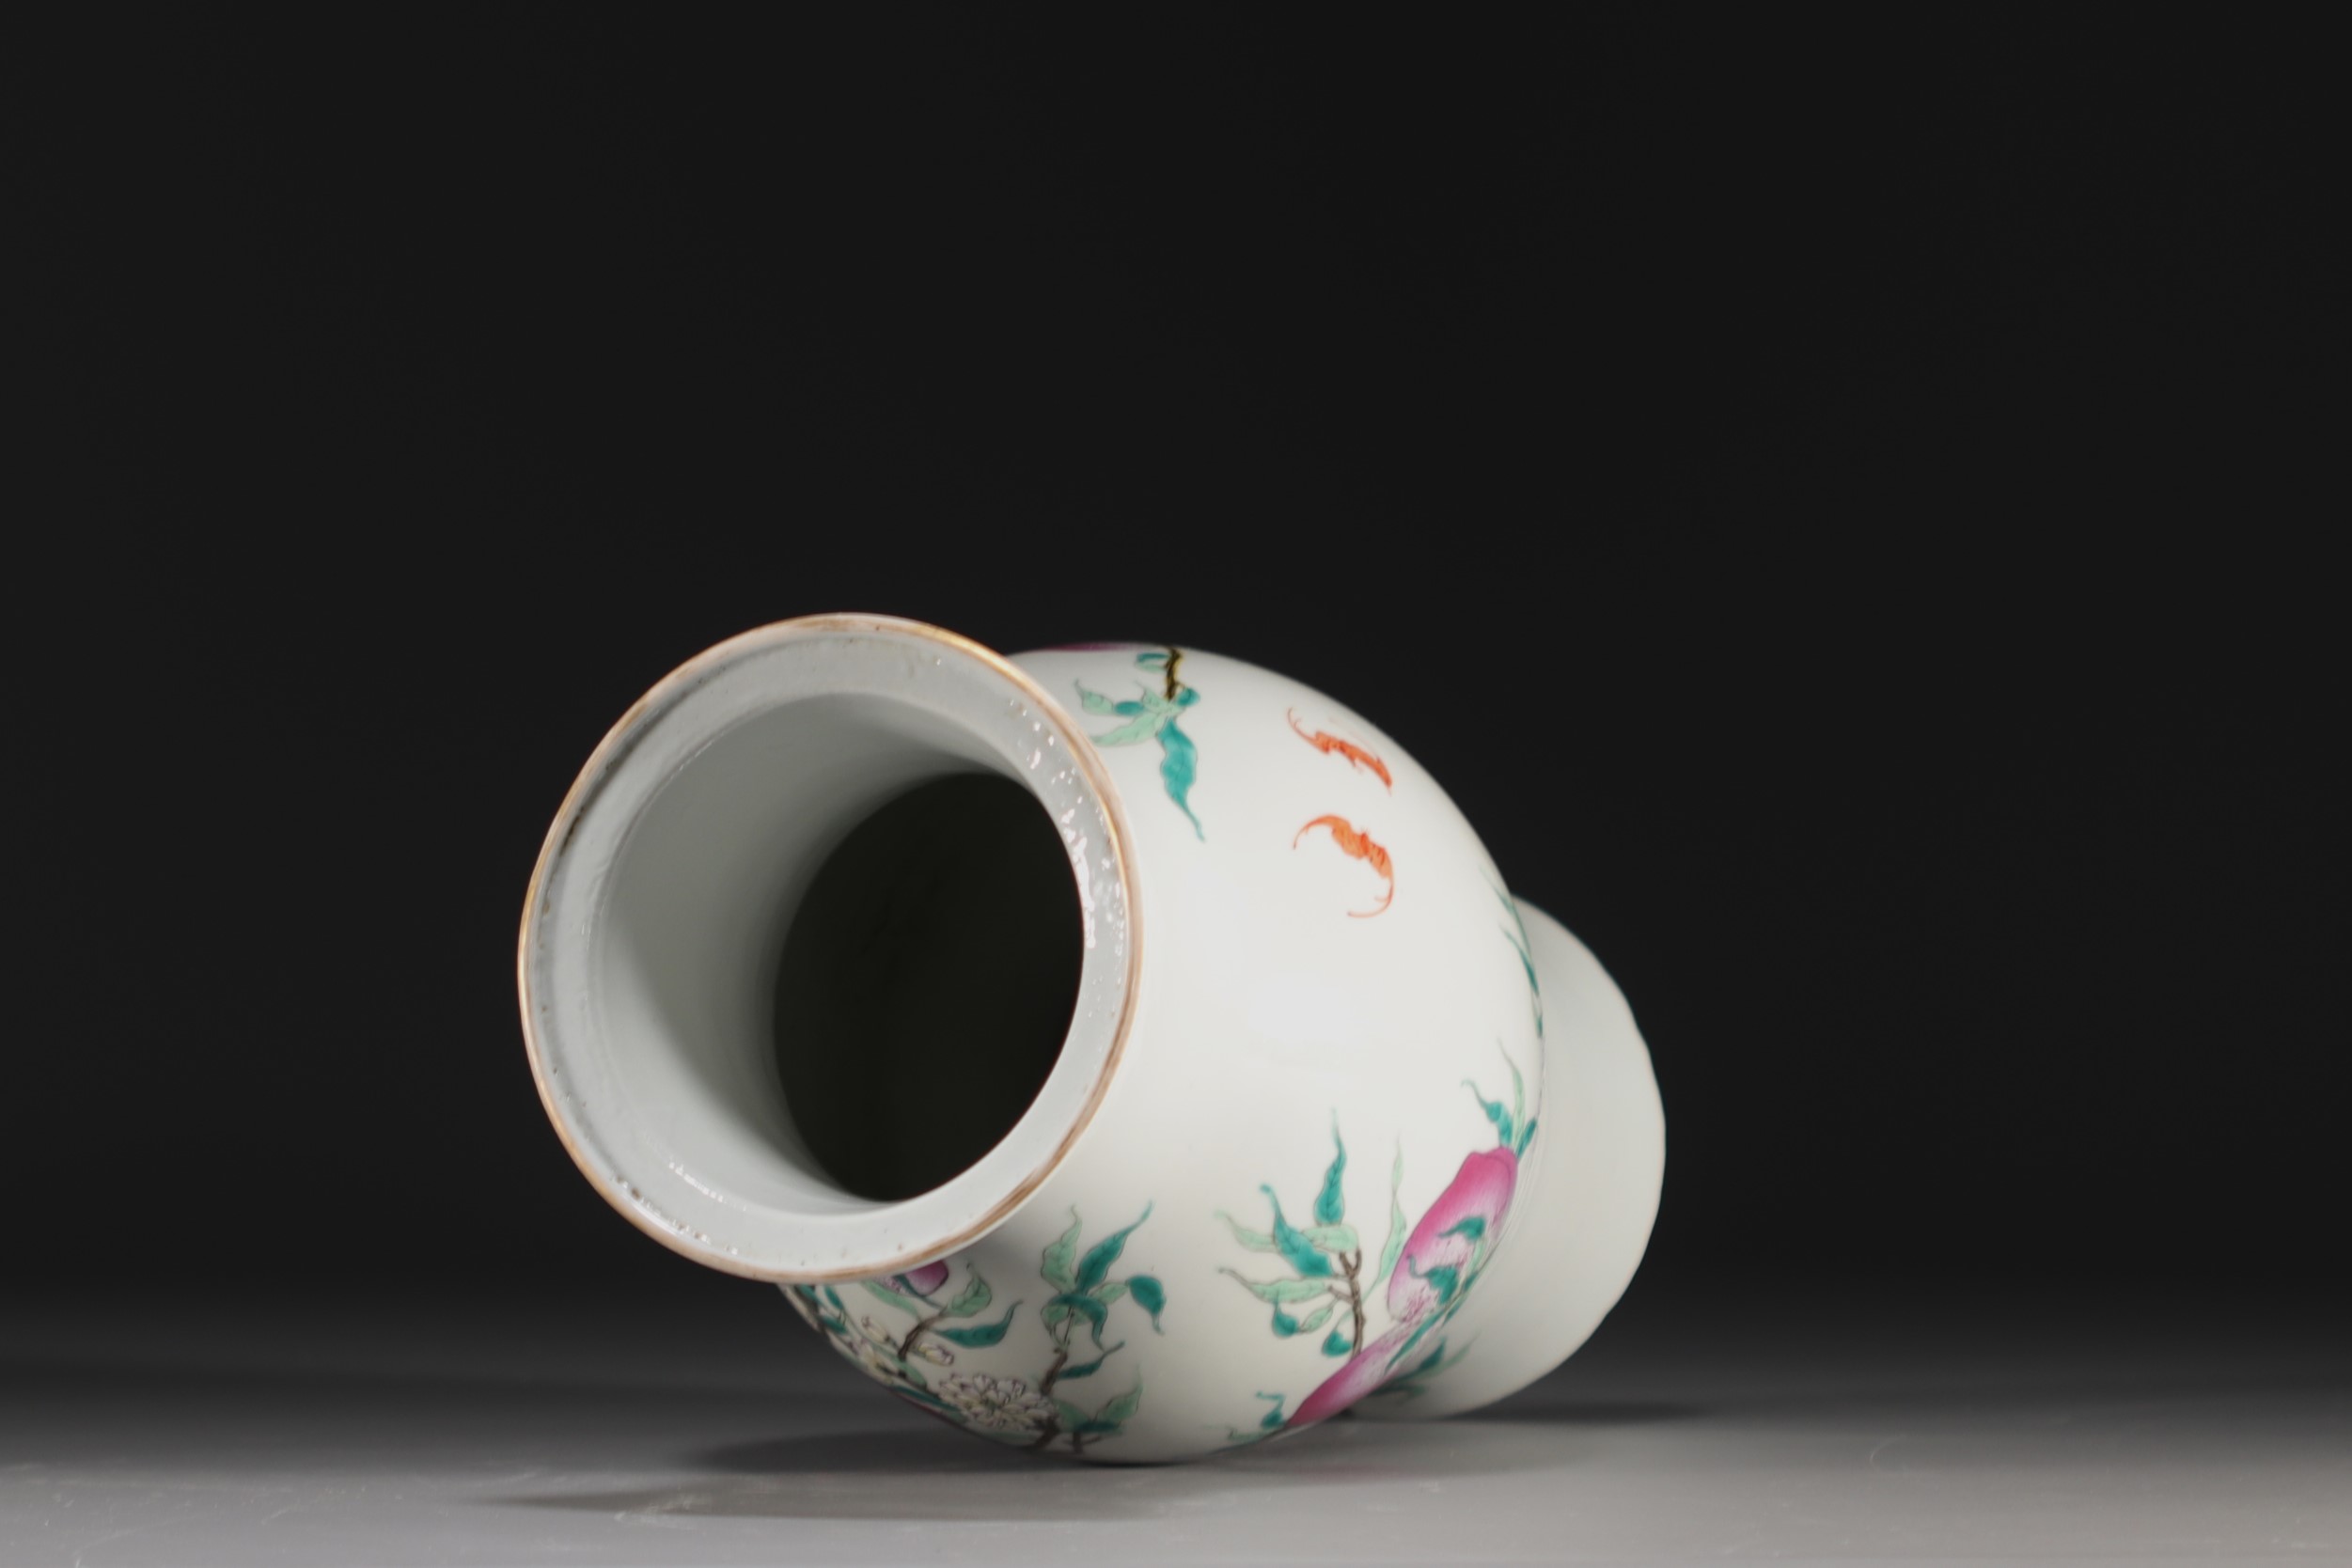 China - Porcelain vase with nine peaches design, famille rose, Qing period. - Image 7 of 7